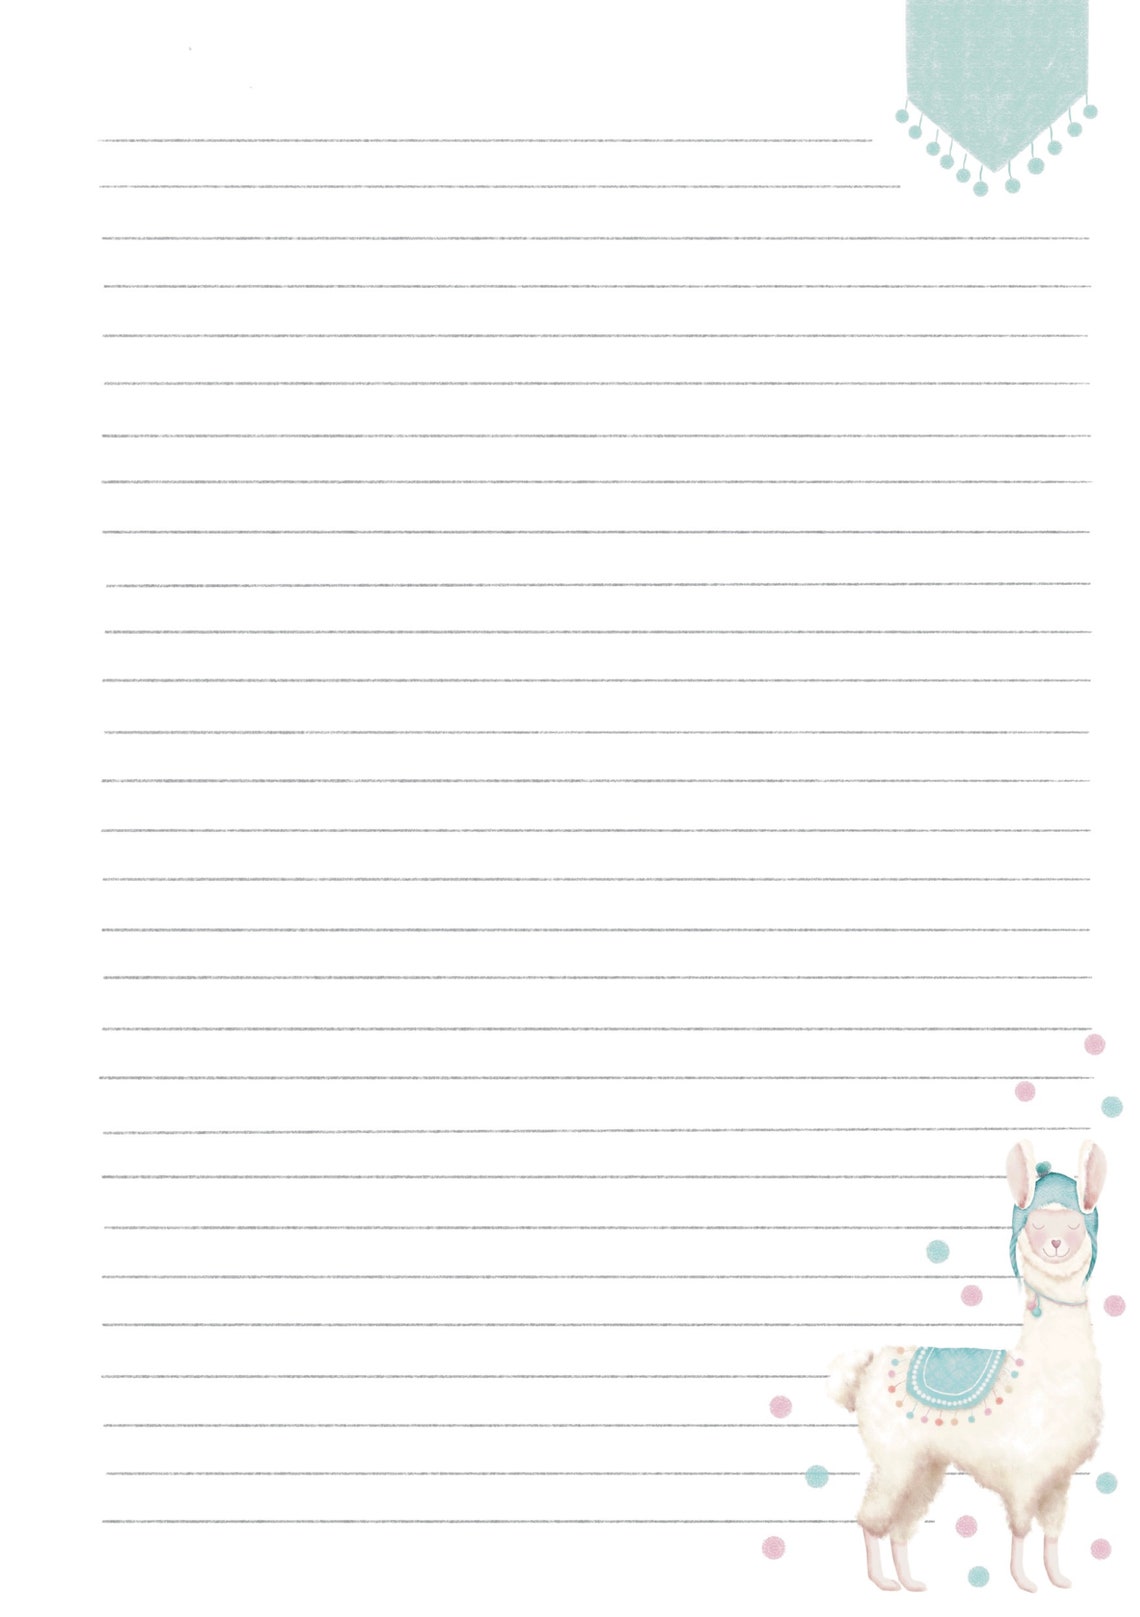 a5 lined paper templates at allbusinesstemplatescom - a5 lined paper a5